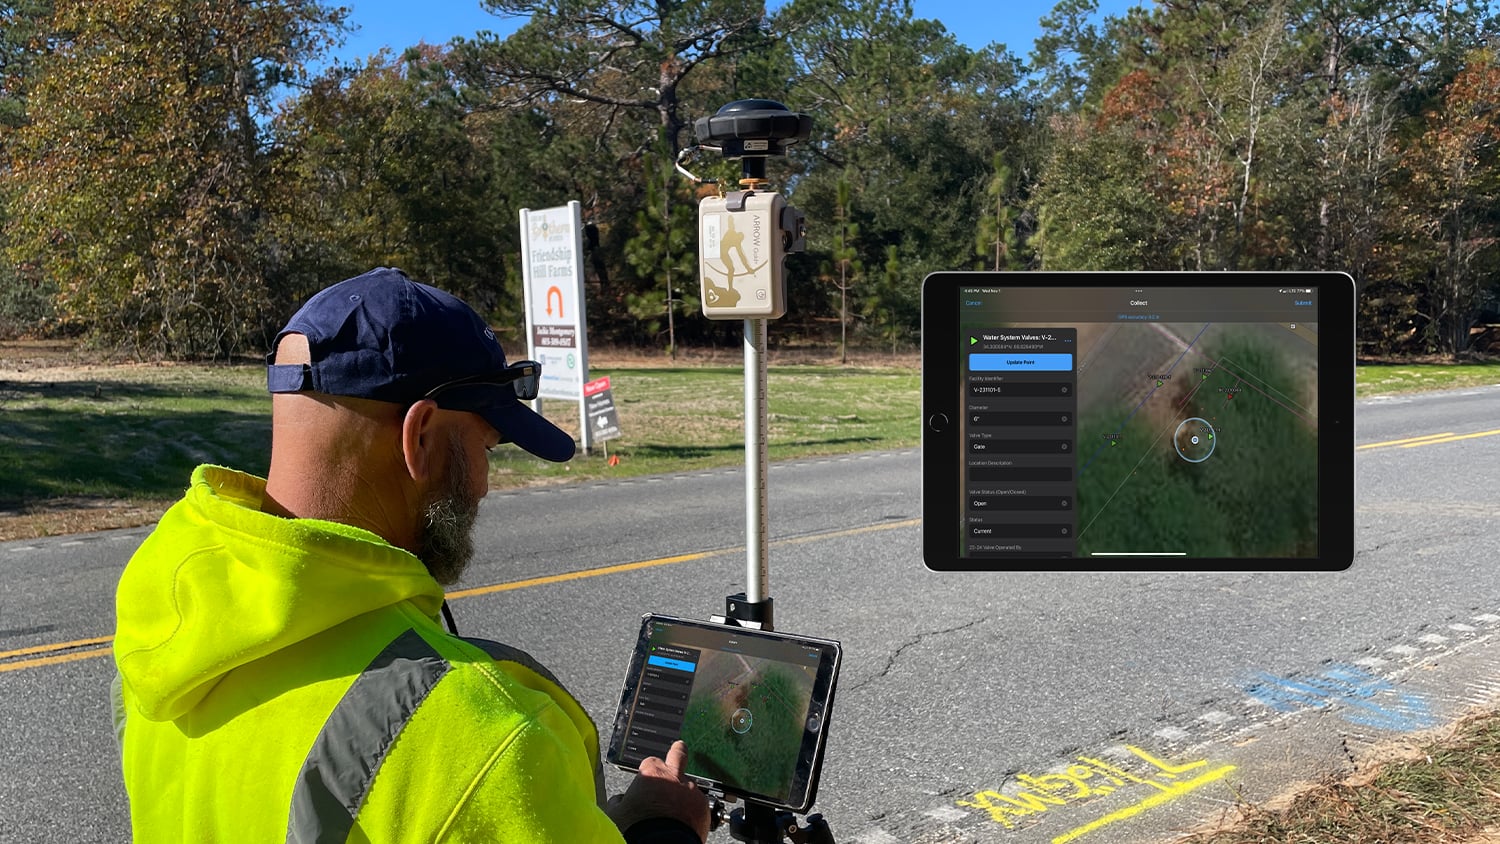 Cassatt Water's Water Quality Manager John Bowers maps a valve with sub-inch accuracy using an Arrow Gold+ receiver, iPad, and ArcGIS Field Maps.